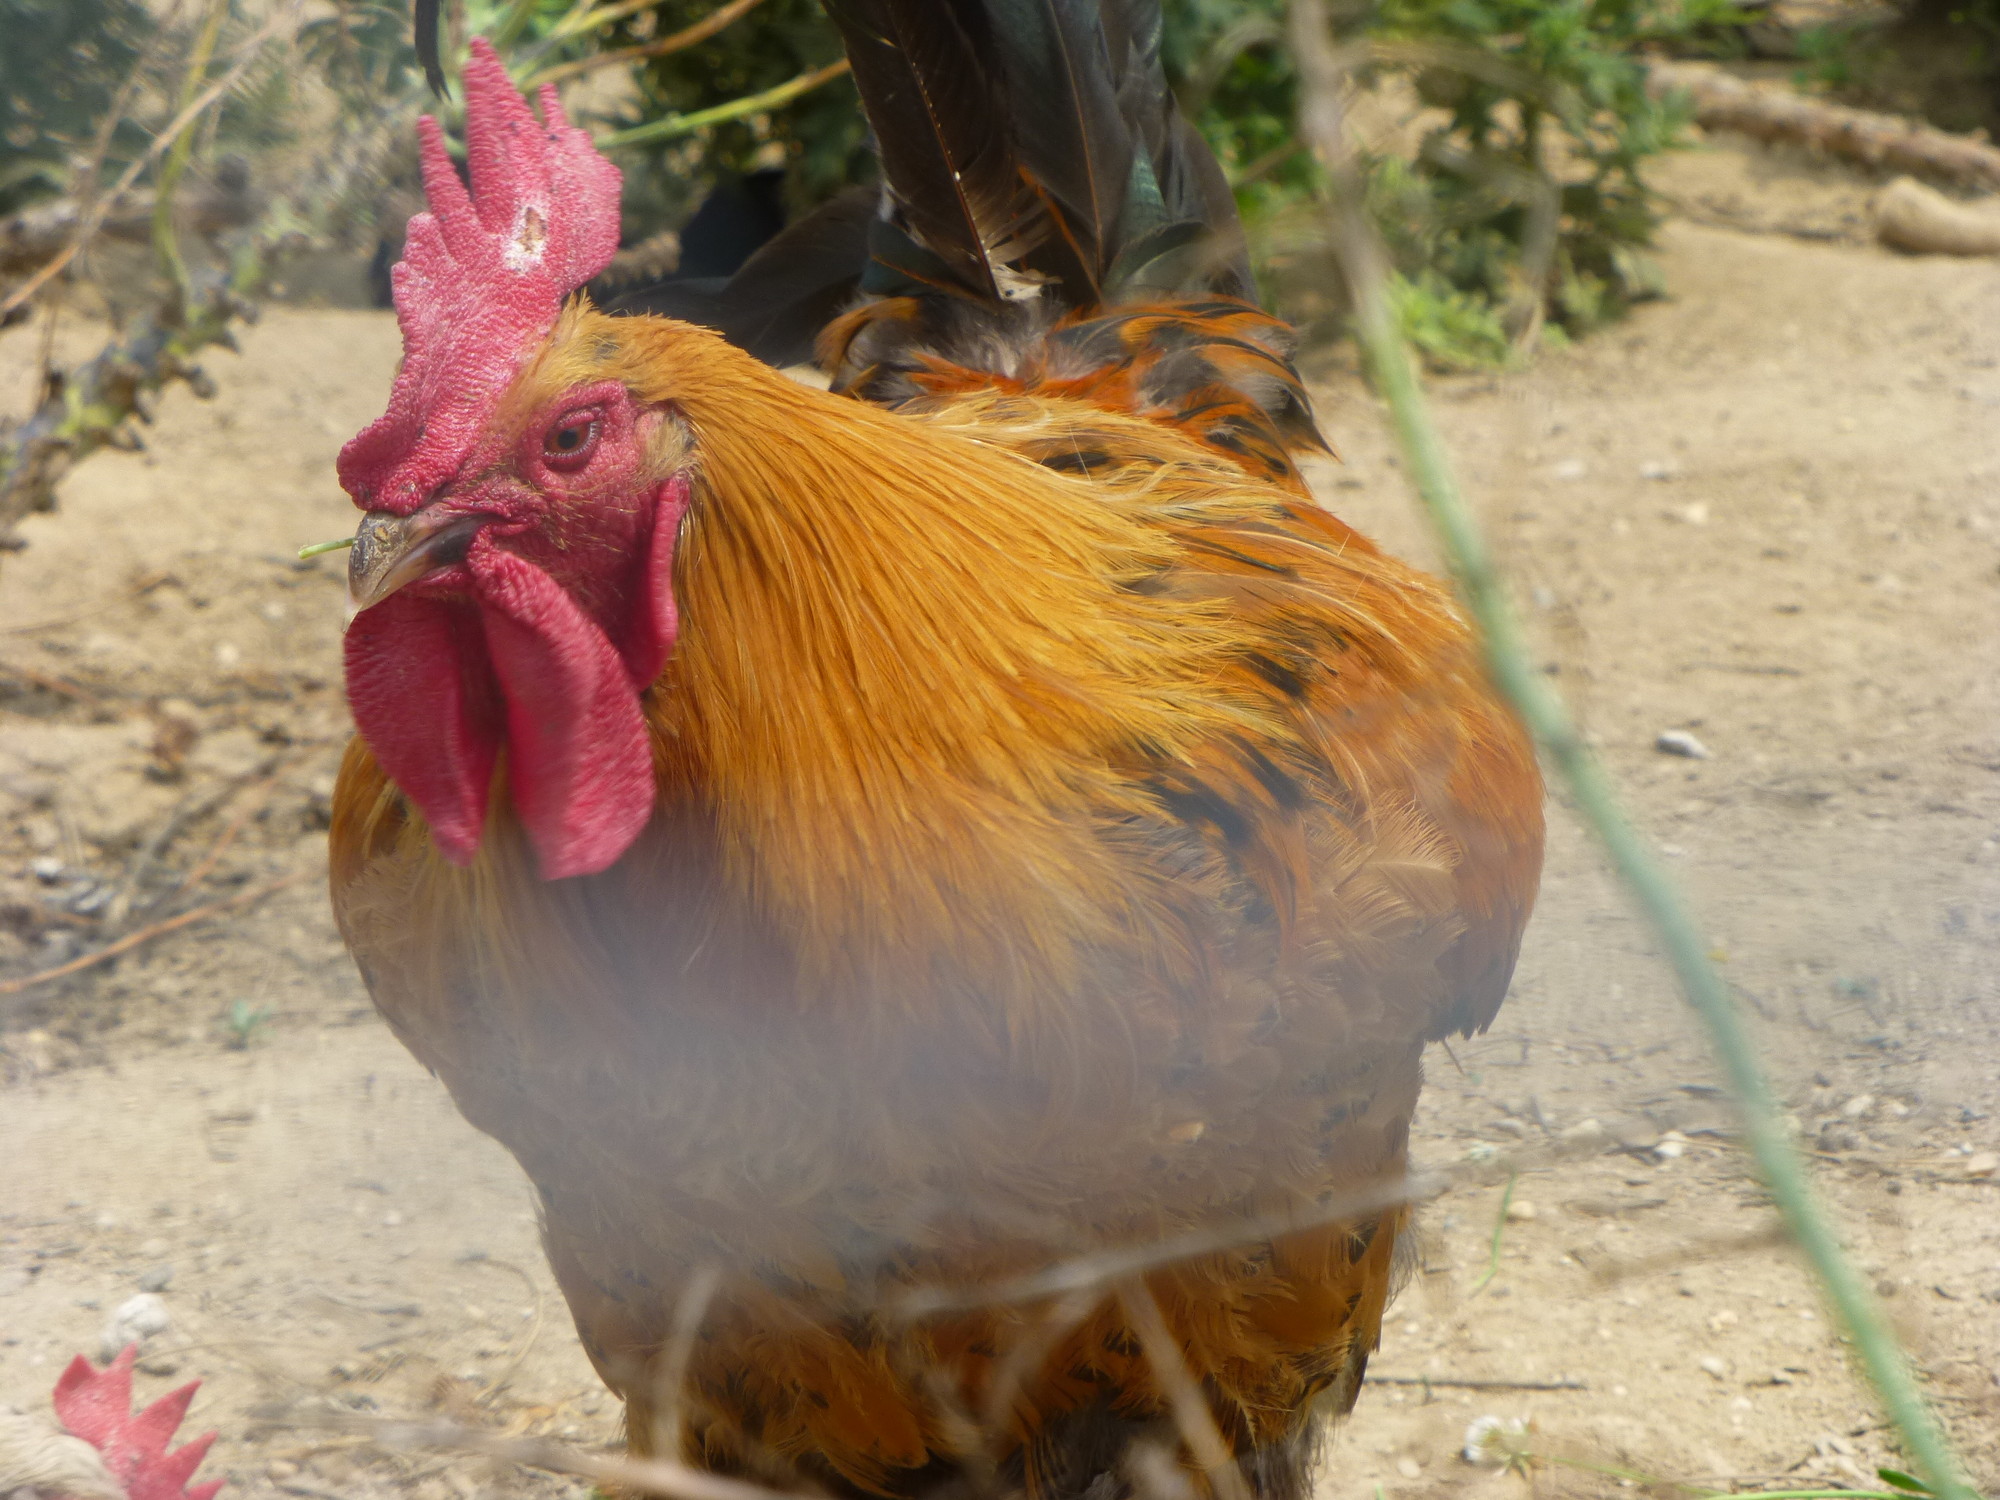 Animals on the farm include chickens and a hen, in a coop that was demolished by Hurricane Sandy and later rebuilt.